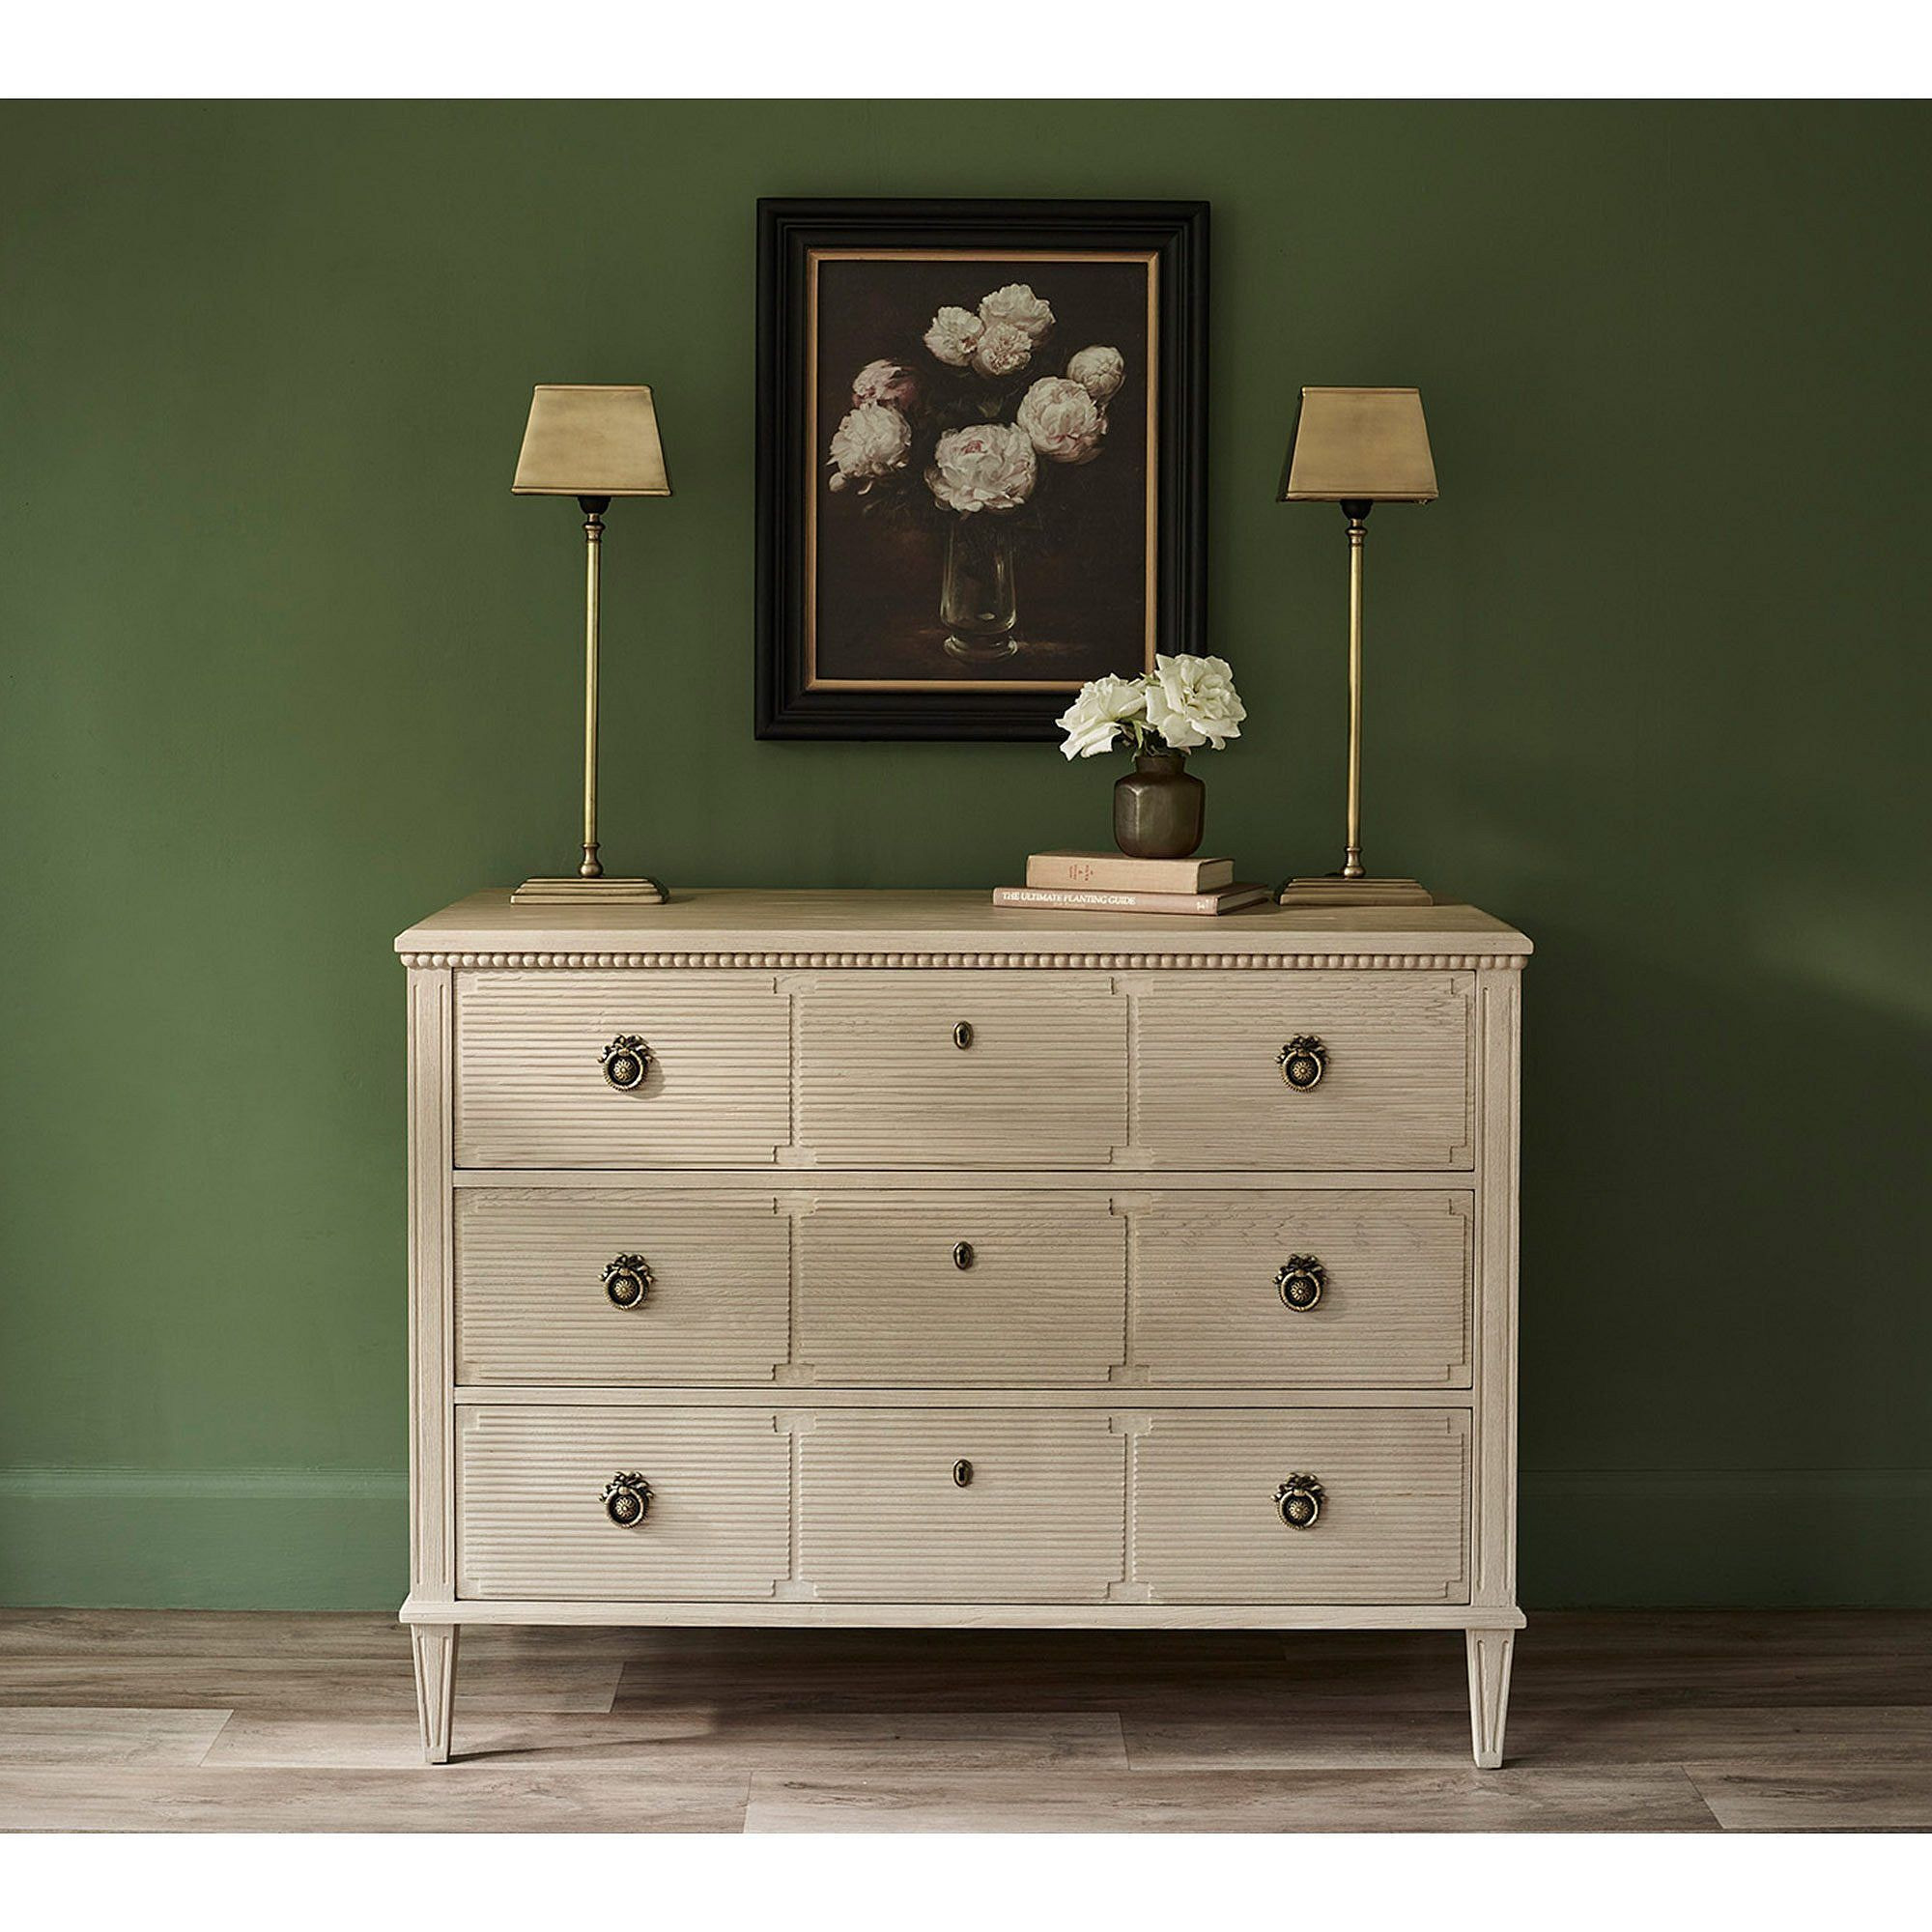 Gustavian Chest of Drawers - image 1